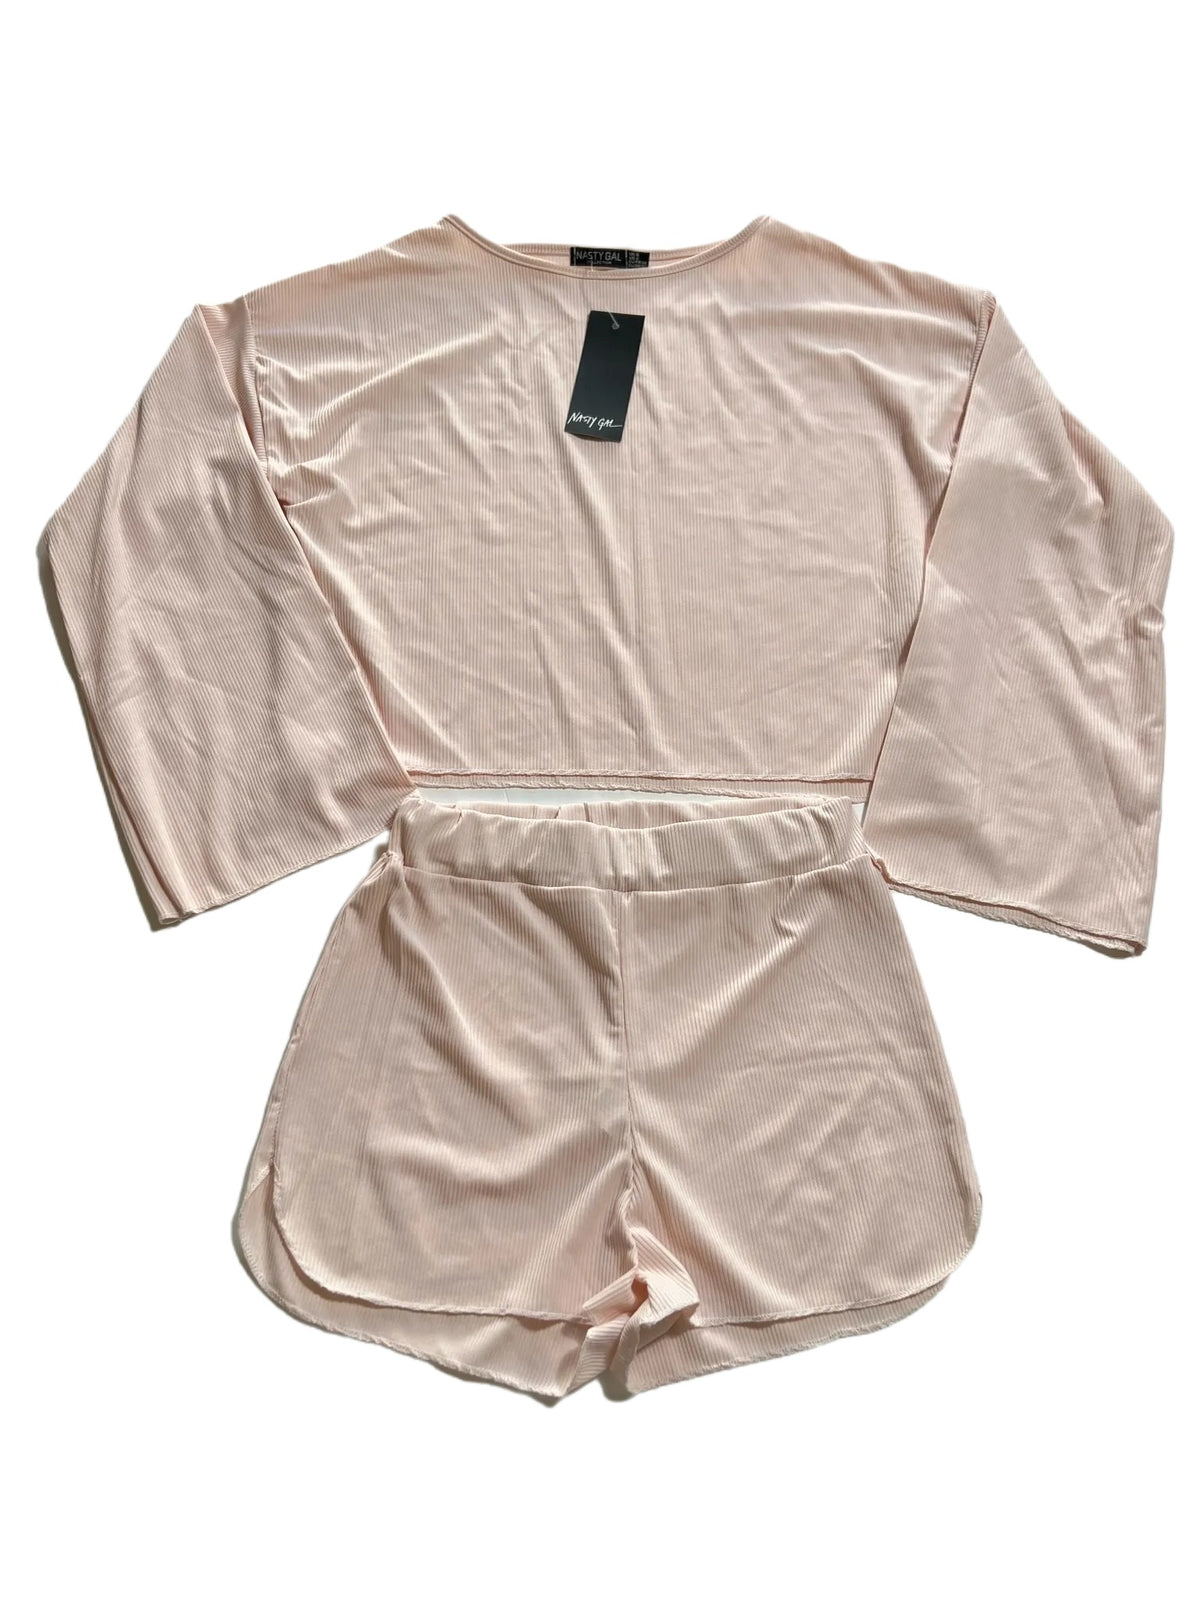 Nasty Gal- Blush Long Sleeve and Shorts Set New With Tags!